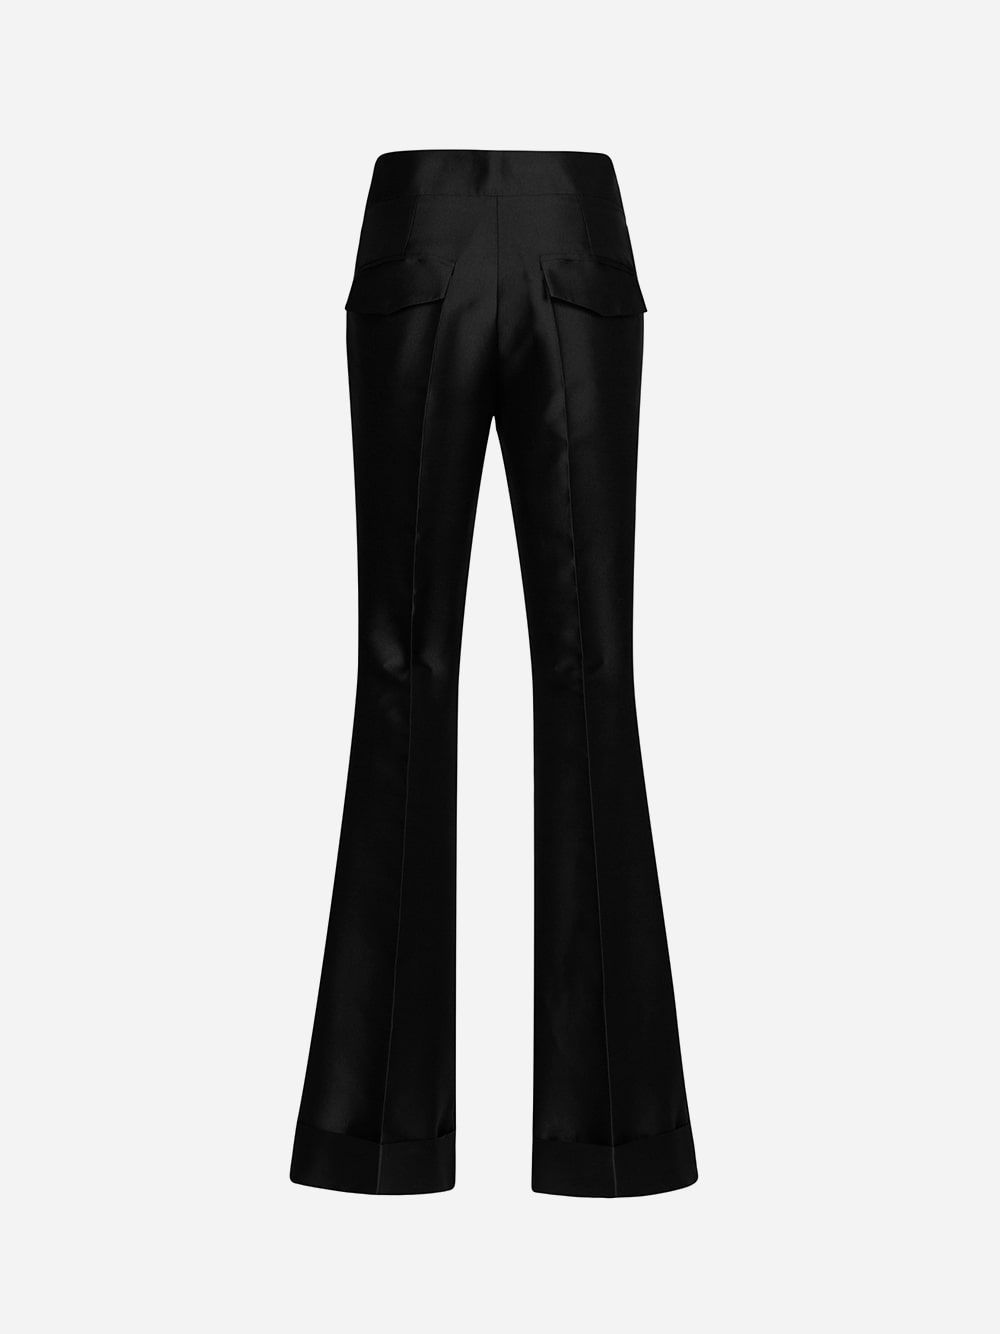 Black Bell Mouth Trousers | Diogo Miranda